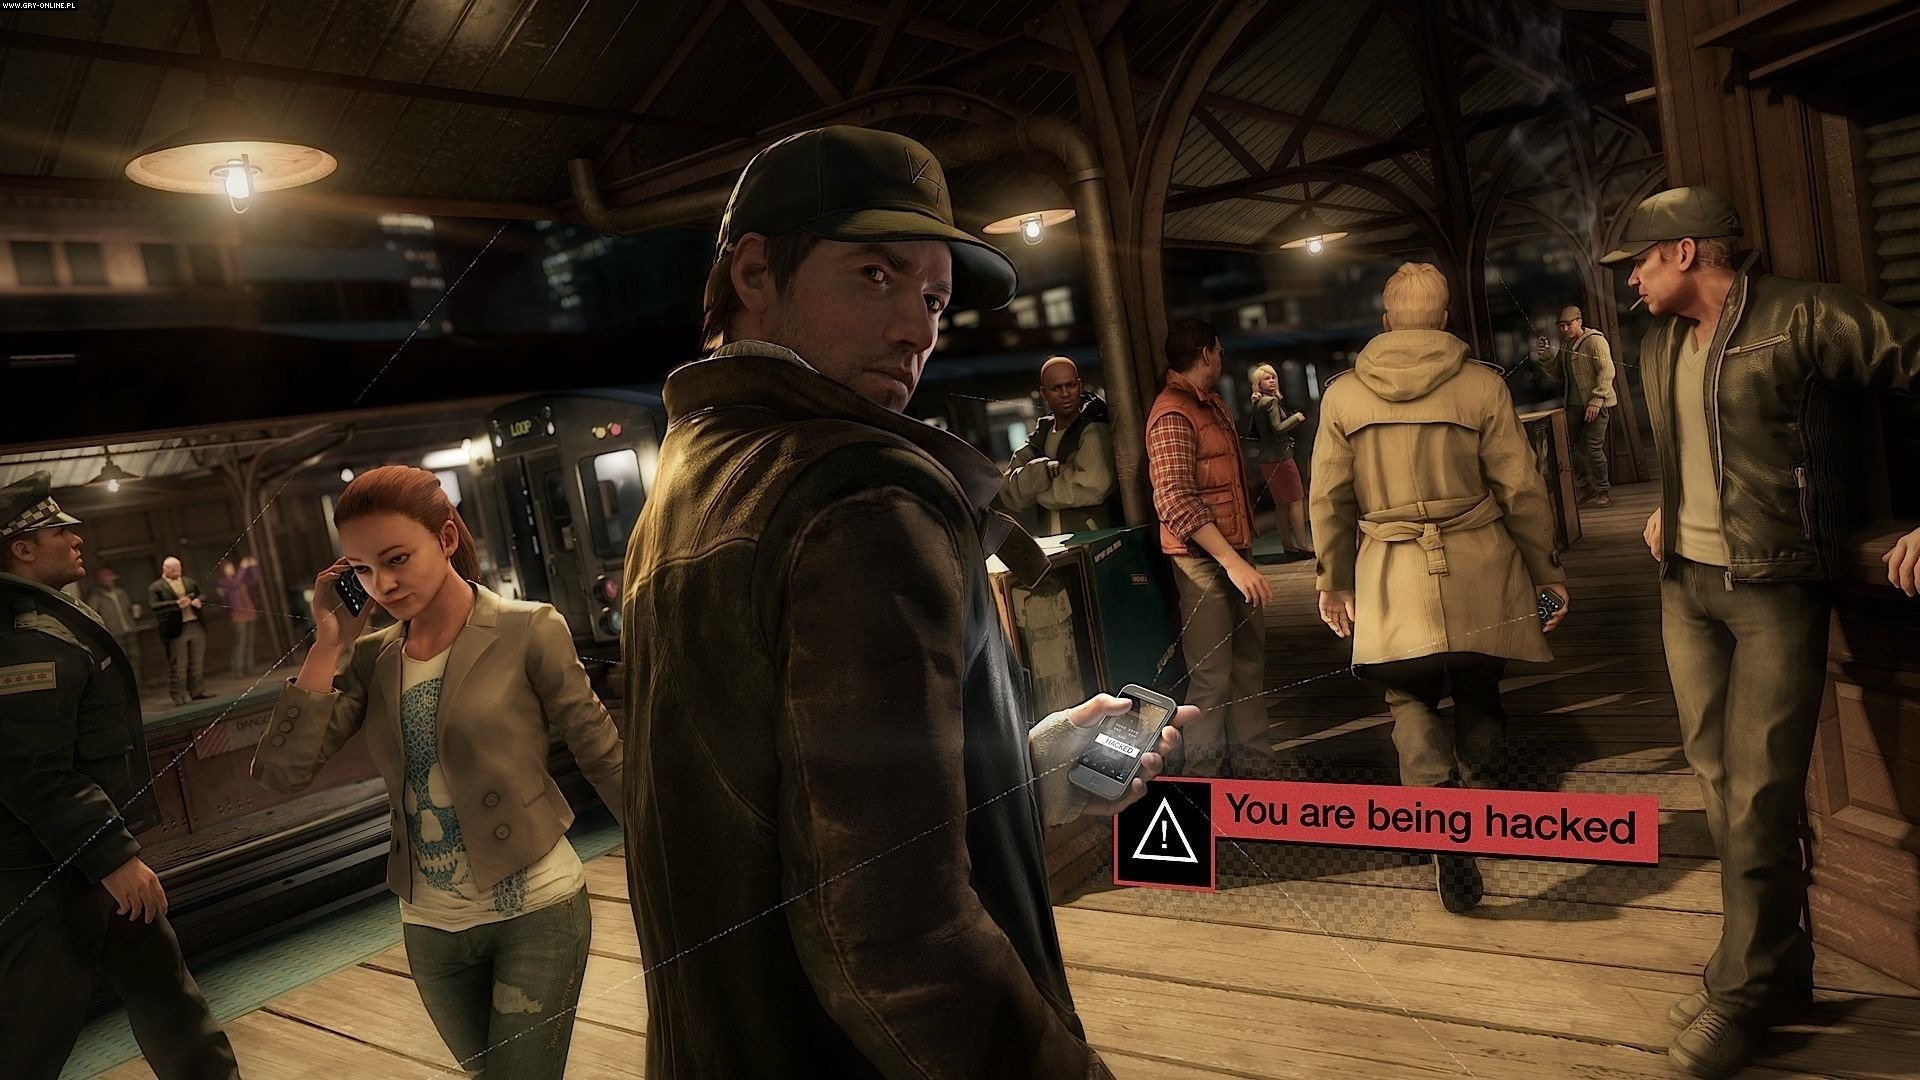 Best Watch Dogs wallpaper ID:117315 for High Resolution hd 1080p computer